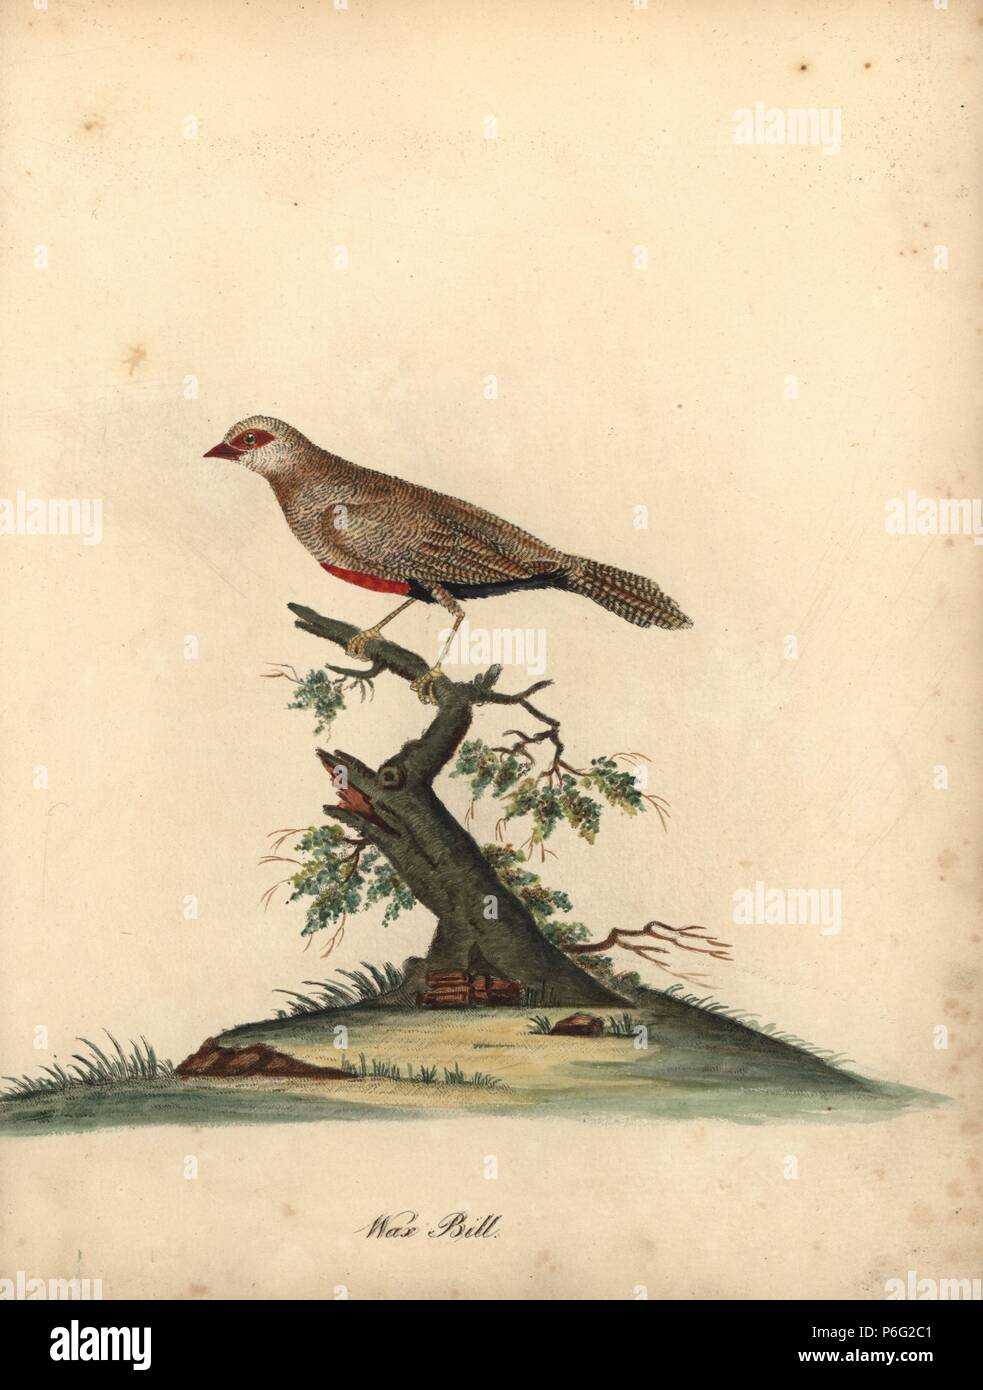 Common waxbill, Estrilda astrild. (Loxia astreld) Handcoloured copperplate engraving of an illustration by William Hayes from Portraits of Rare and Curious Birds from the Menagery of Osterly Park, London, Bulmer, 1794. Stock Photo